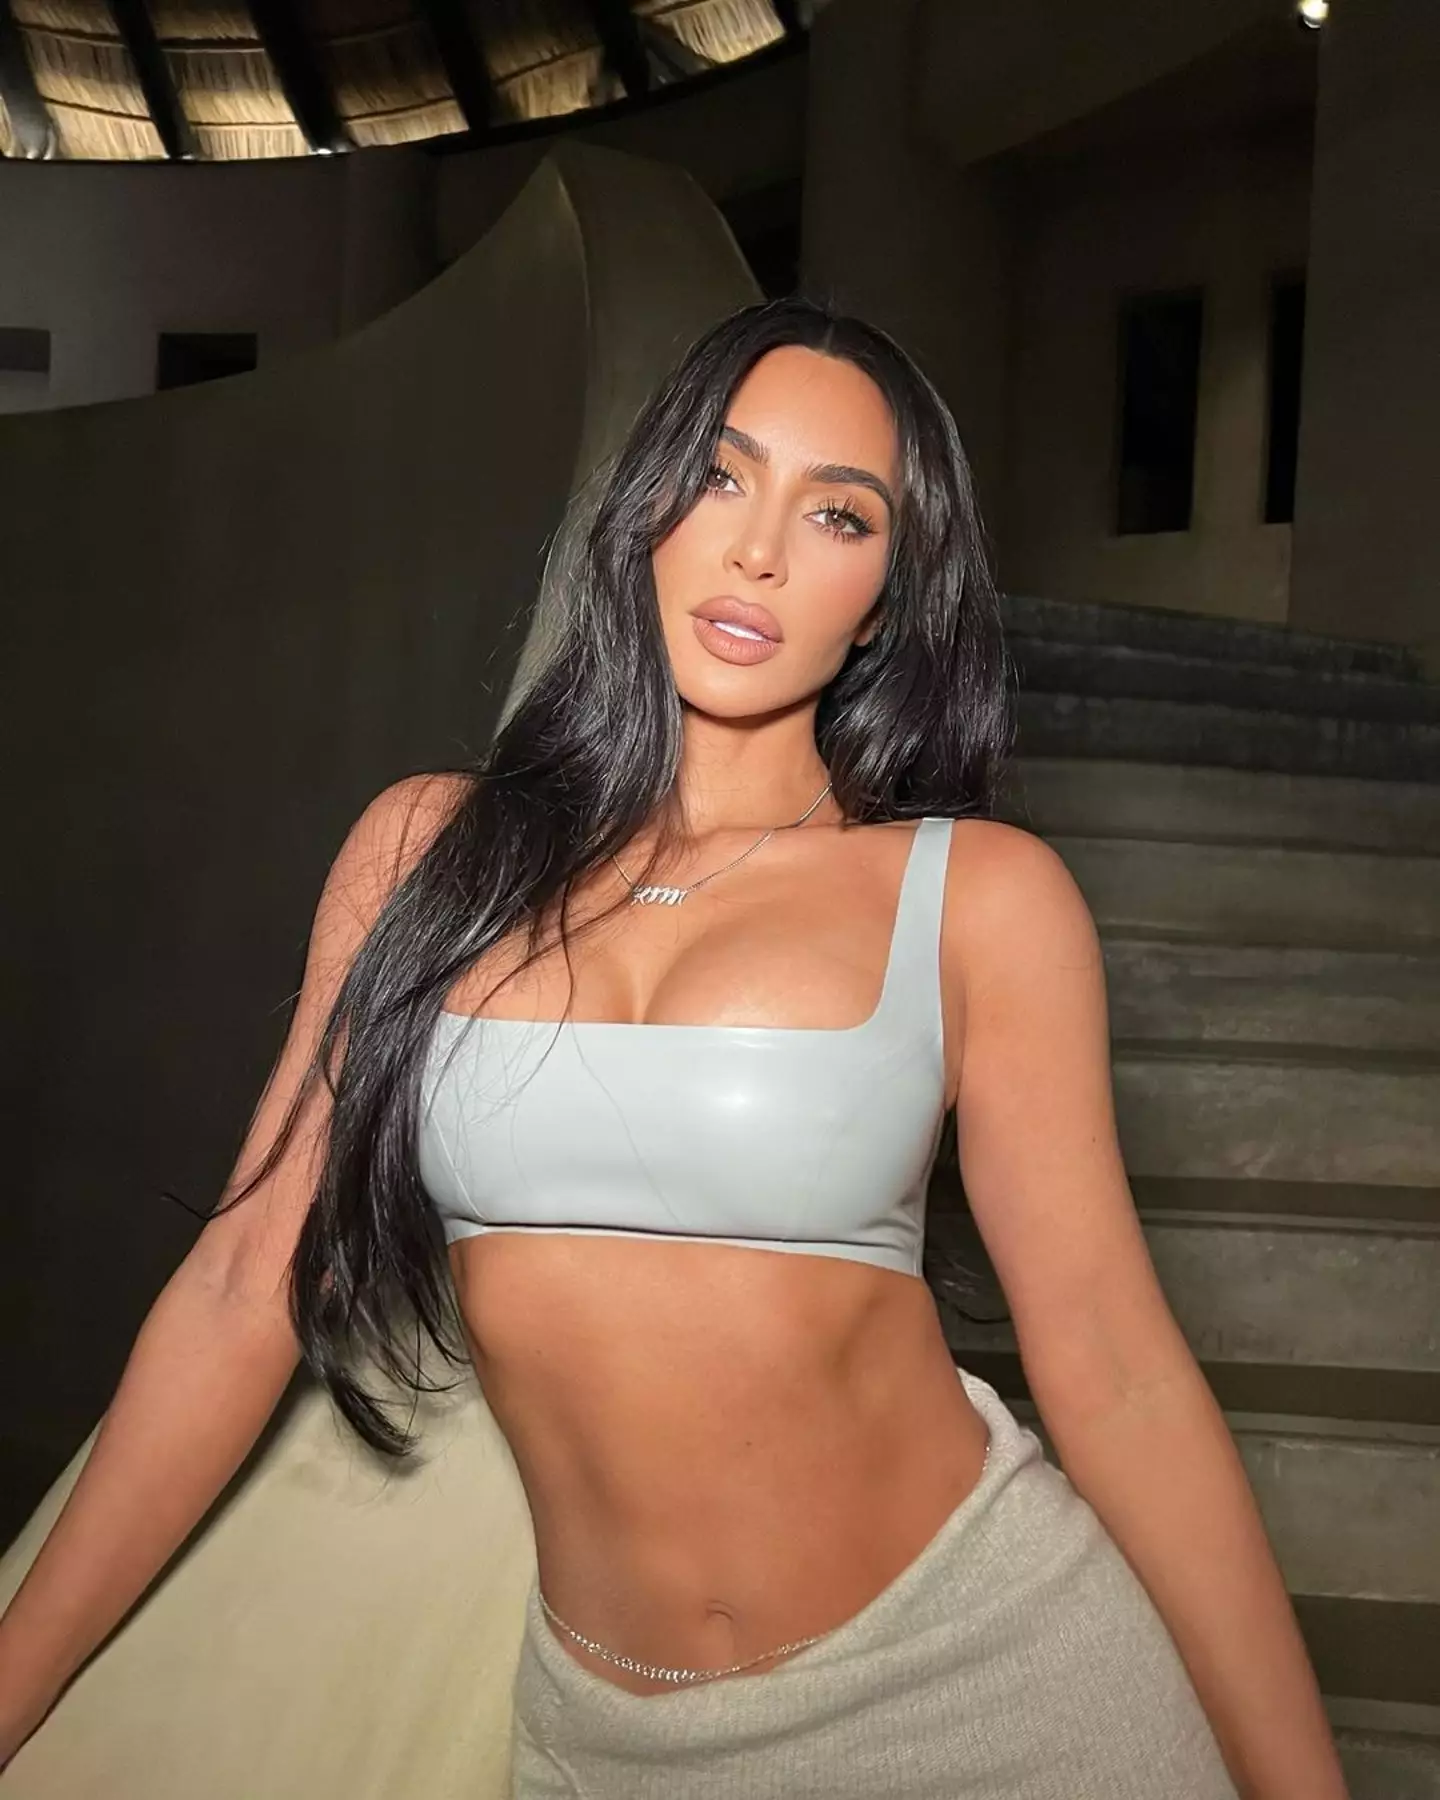 Fans debate the authenticity of Kim Kardashian's Instagram after 'unedited face' pics circulated online.